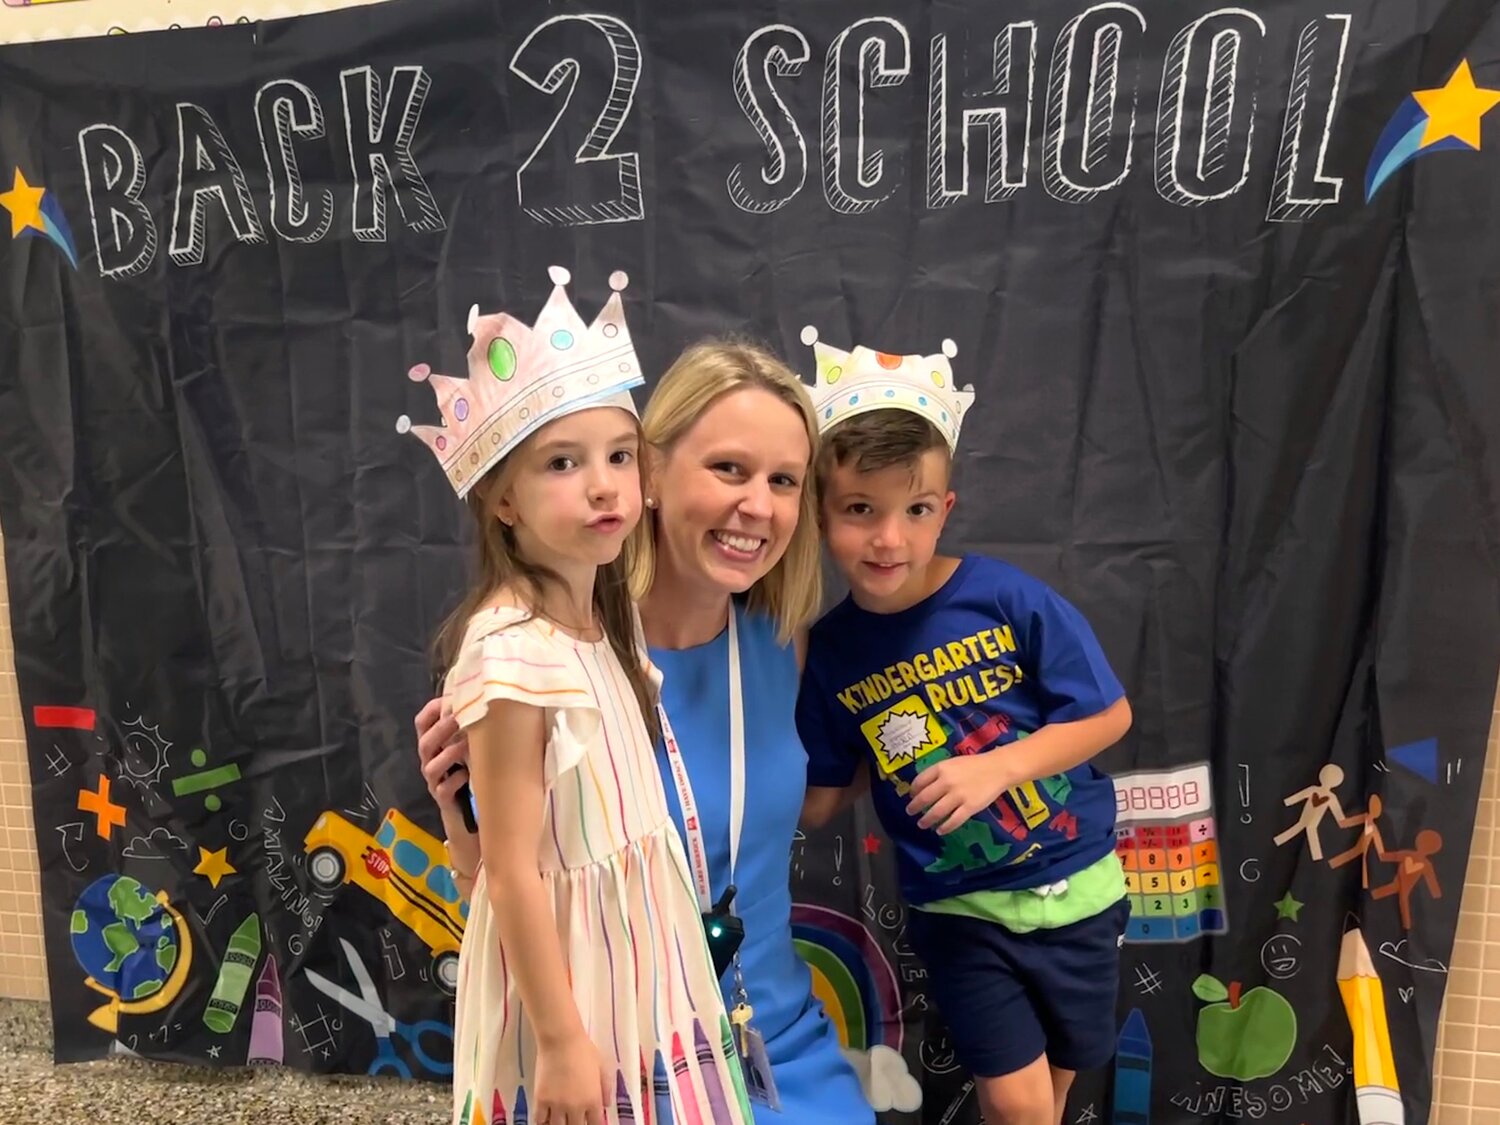 Meredith Kelly, assistant principal at Birch School, stopped to pose with students as they start their first day of school.